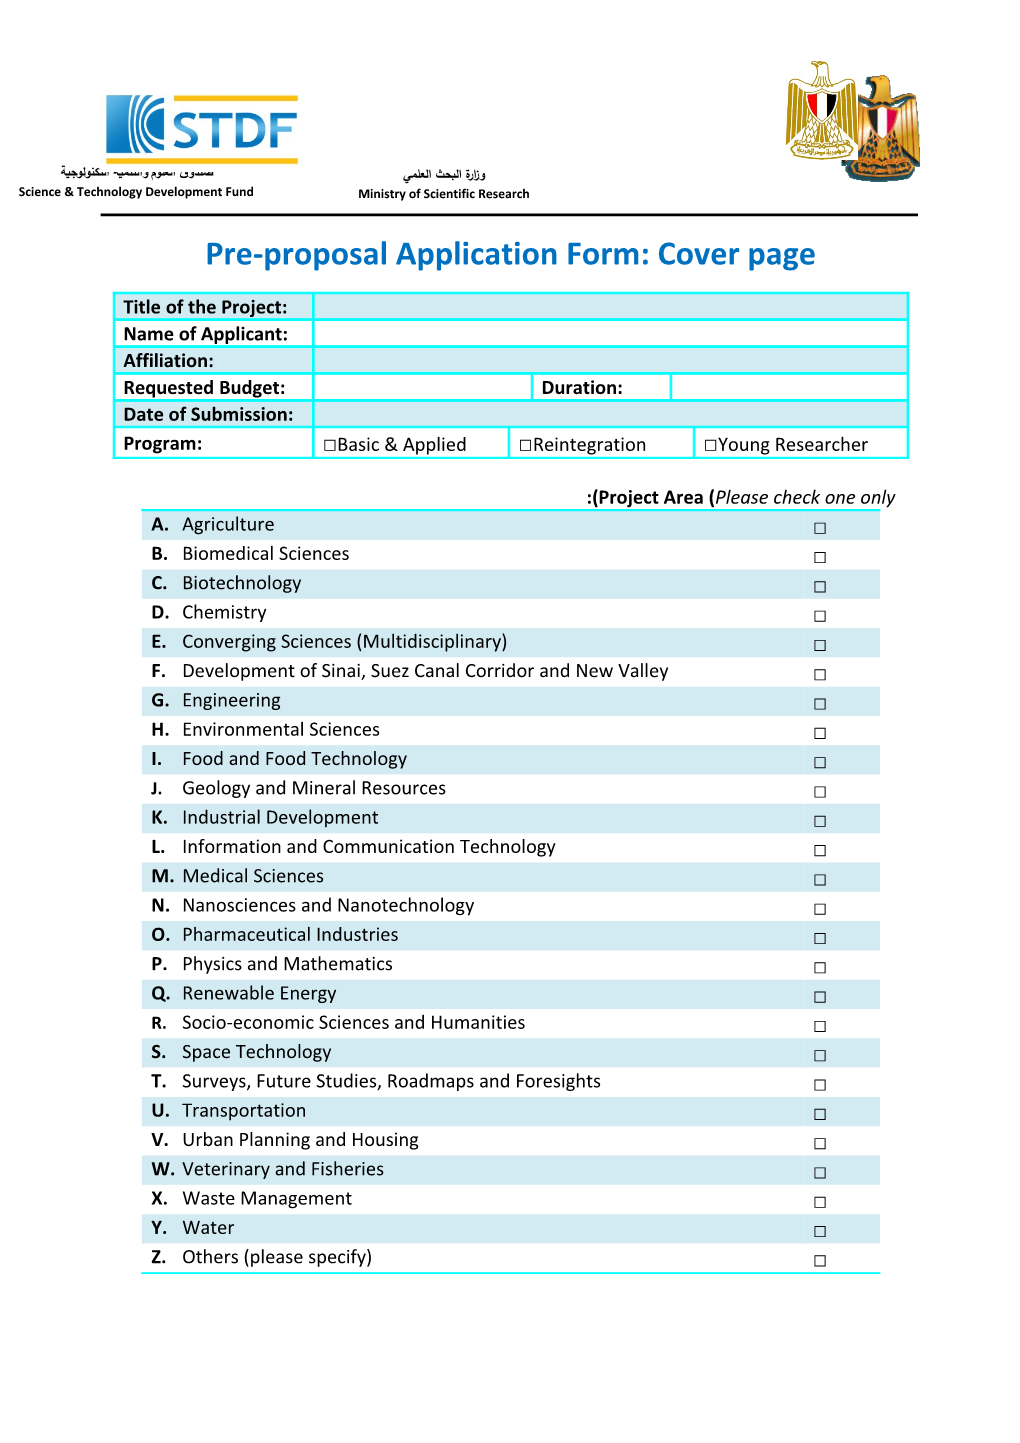 Pre-Proposalapplication Form: Cover Page